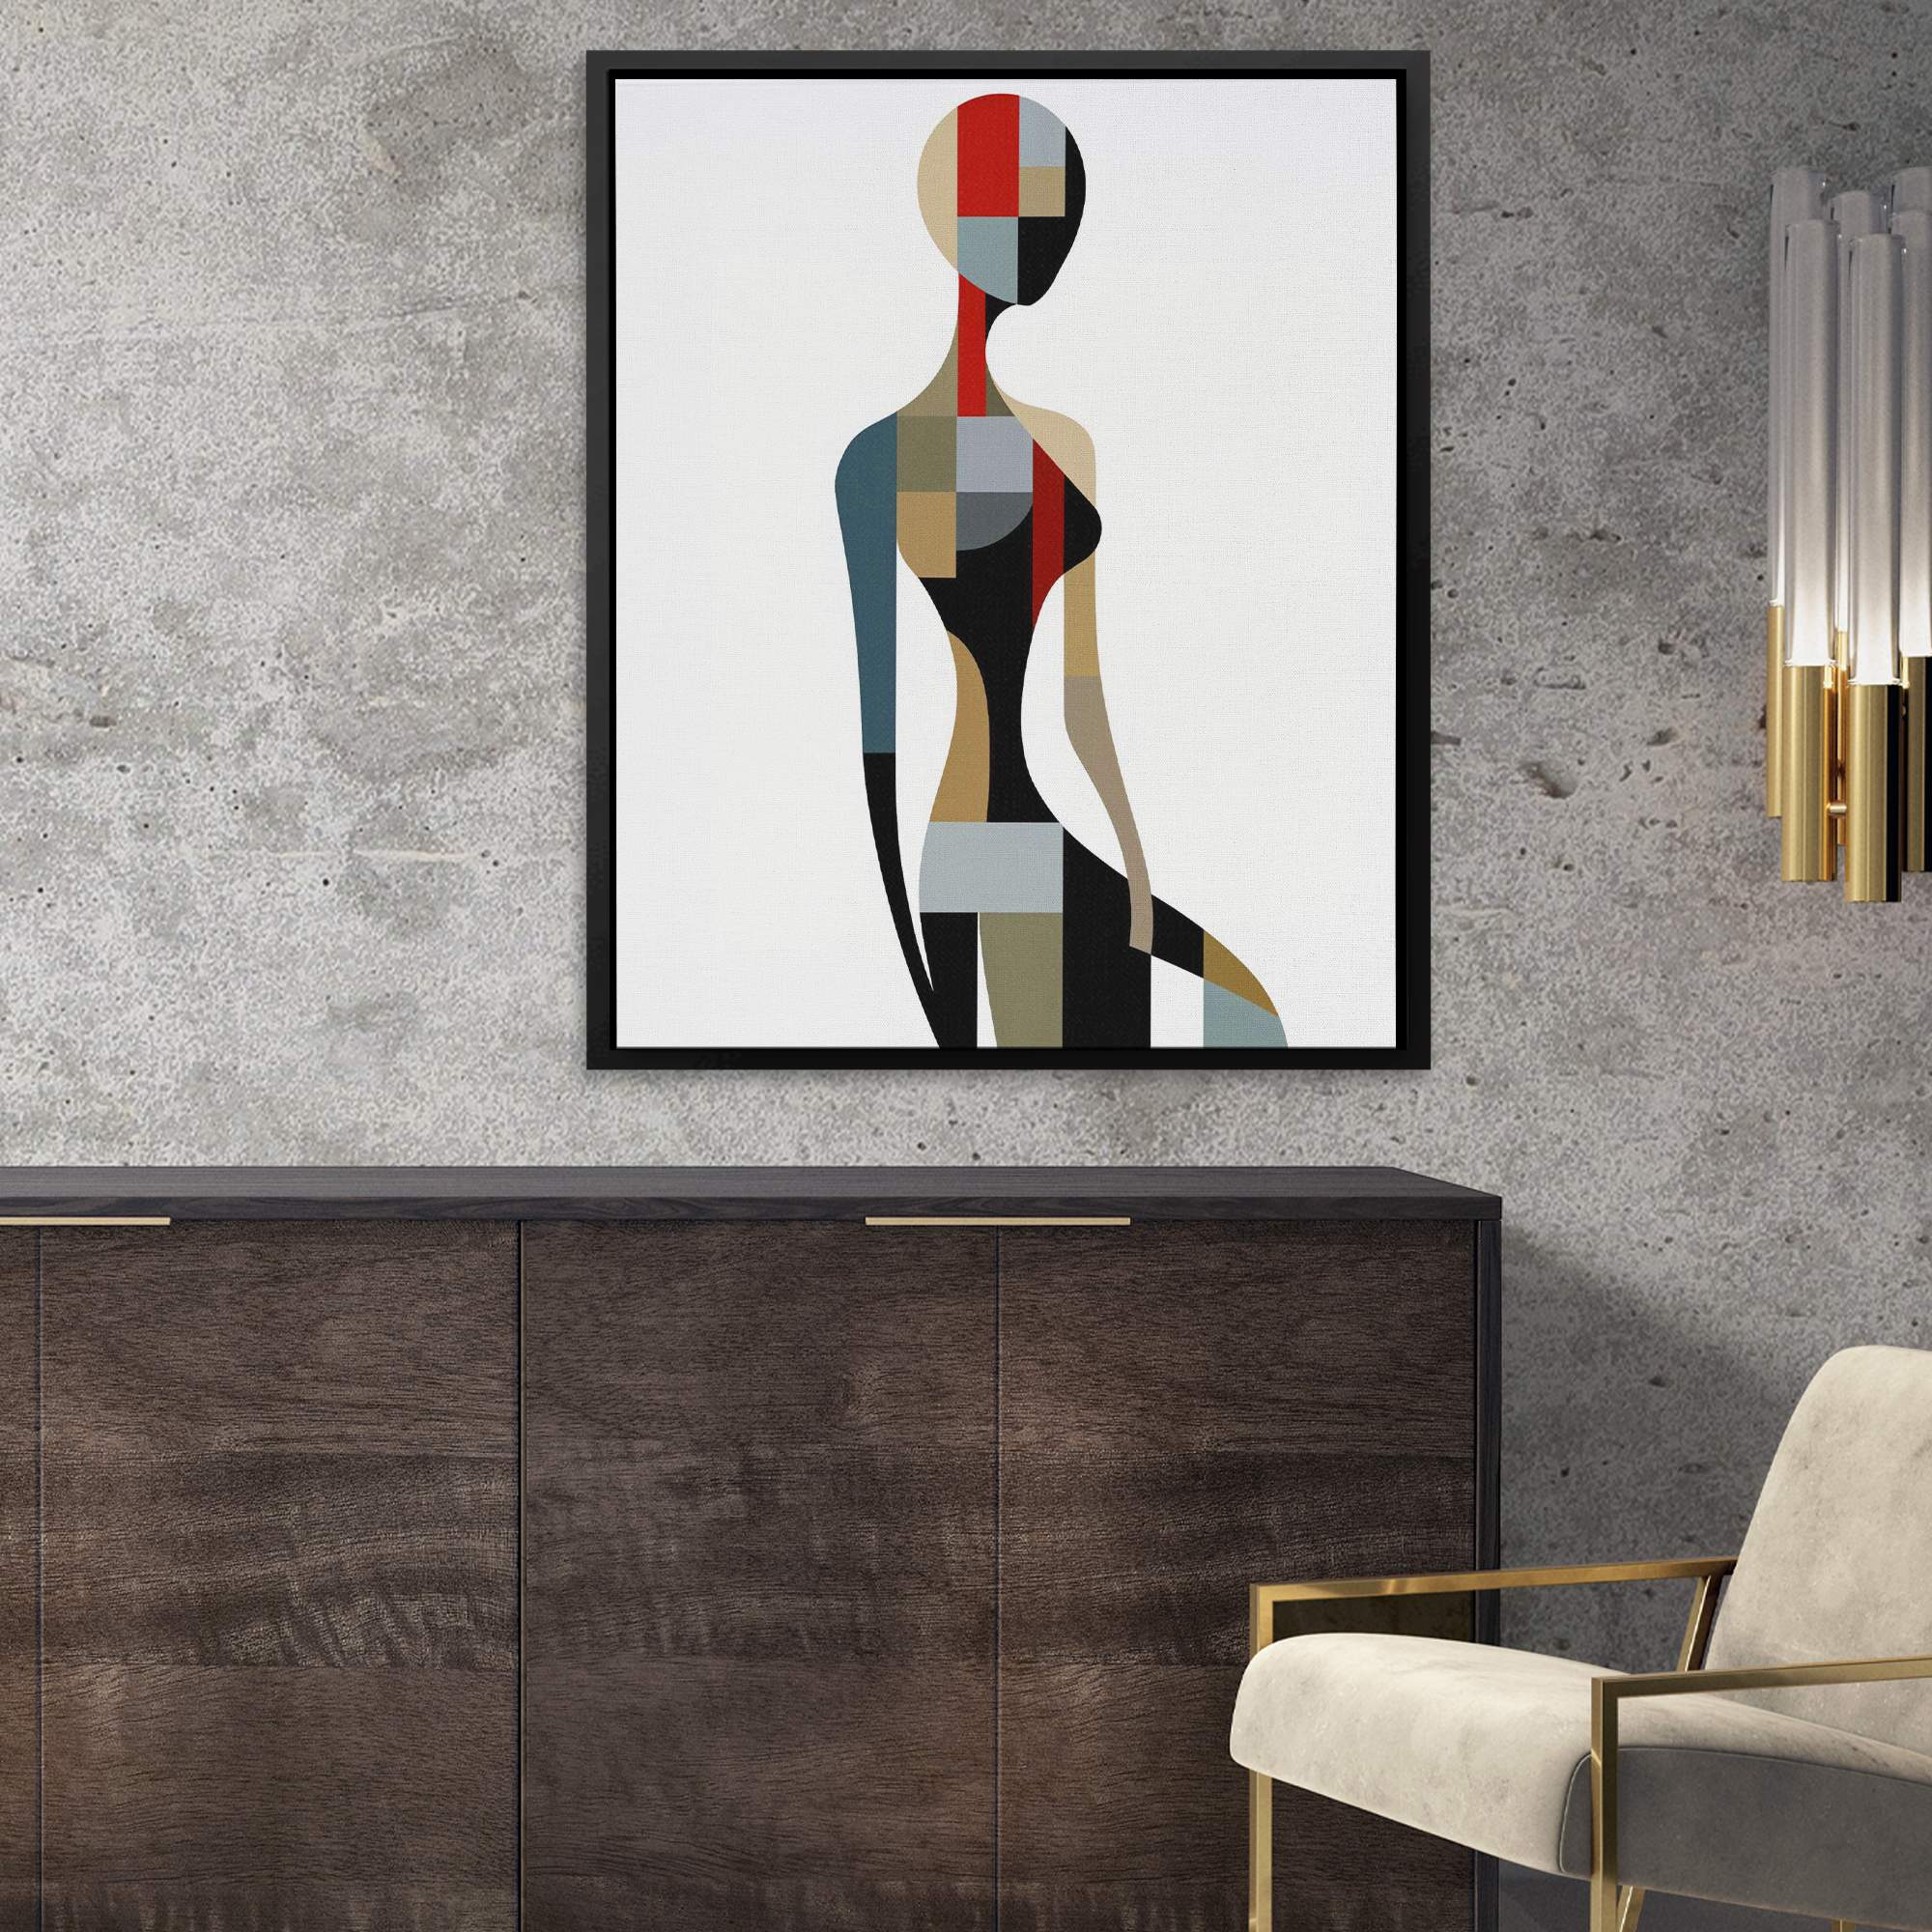 Resilient Soul - Luxury Wall Art